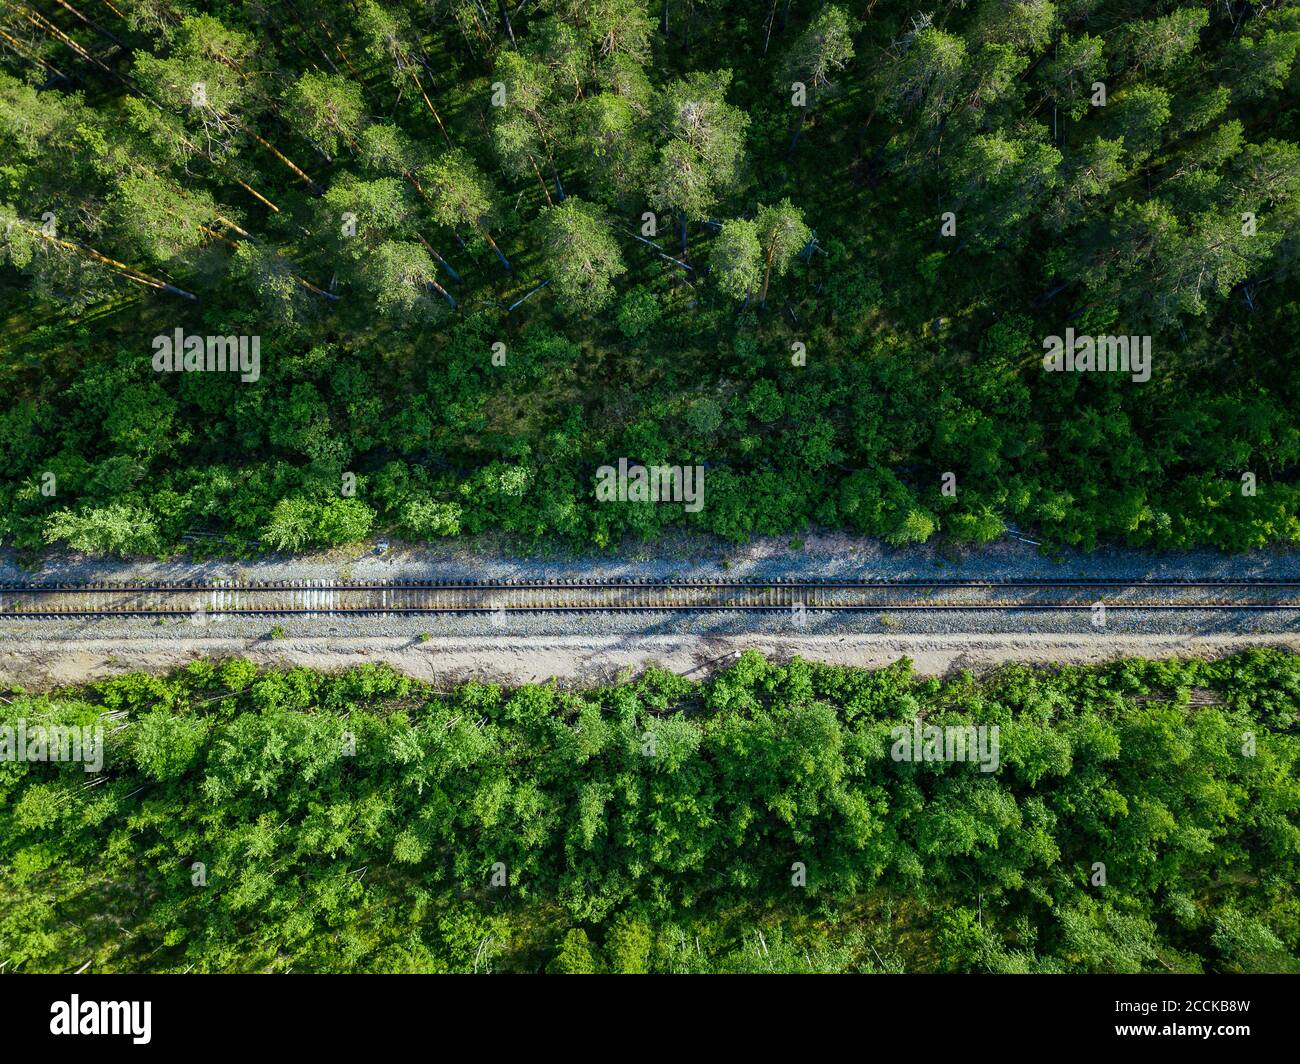 Russia, Petrozavodsk Oblast, Karelia, Railroad track crossing forest, aerial view Stock Photo